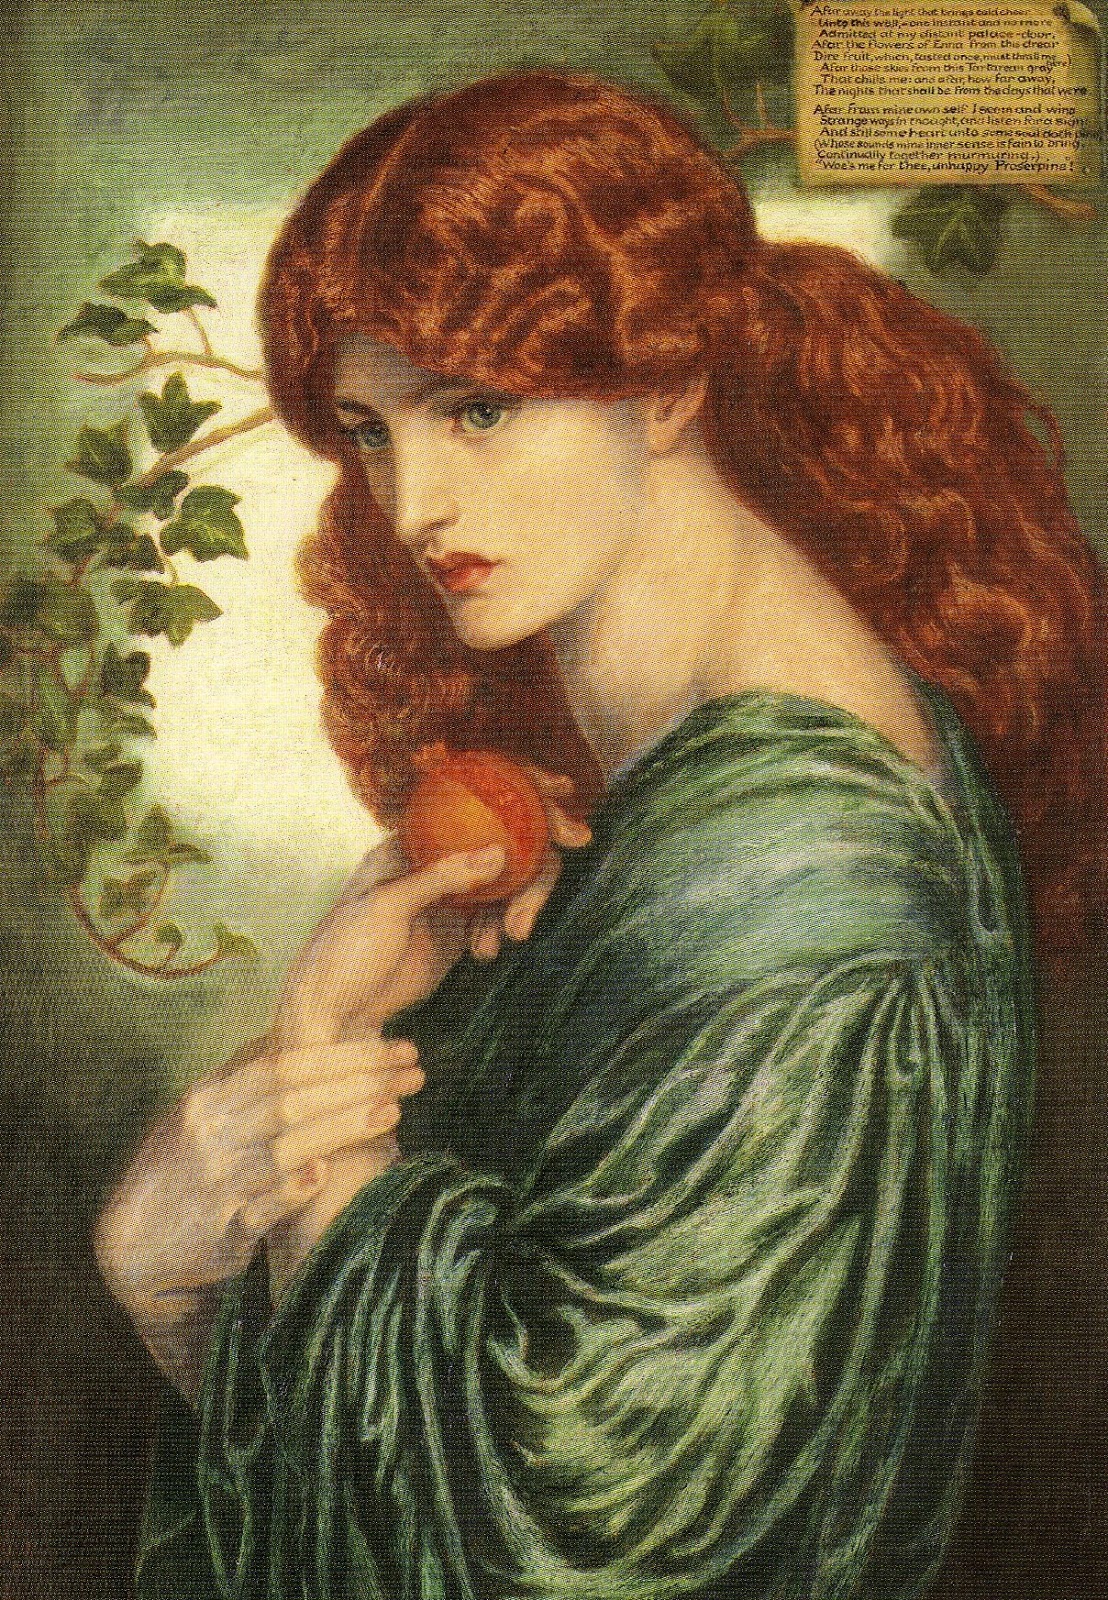 Elizabeth Siddal Was A Famous Victorian Beauty And Artist's Model...